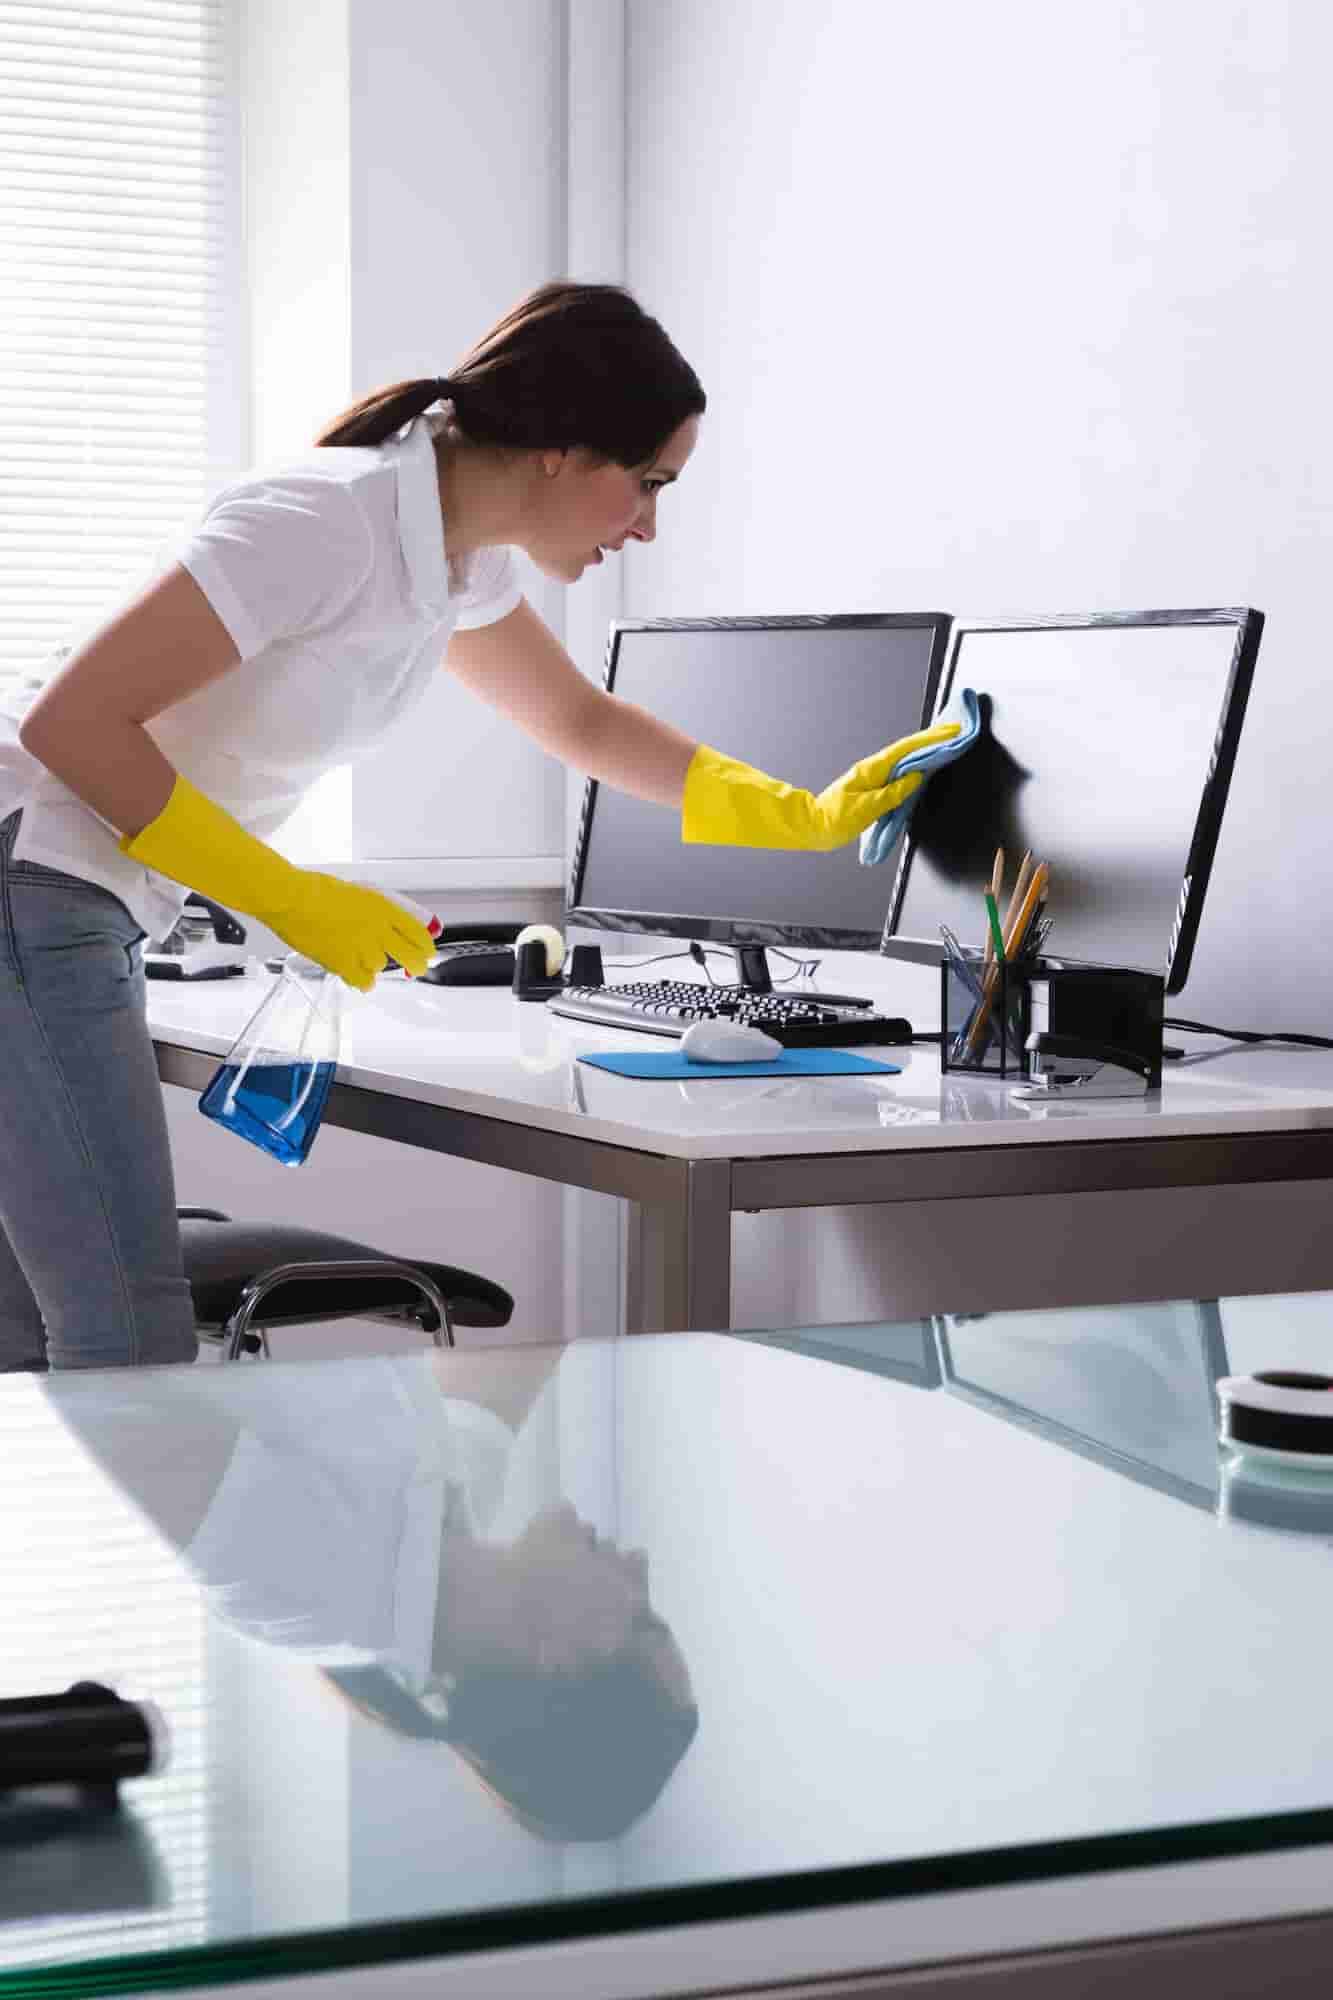 Housekeeper Placement Services Near You in Costa Mesa, CA, You’ve Got It Maid